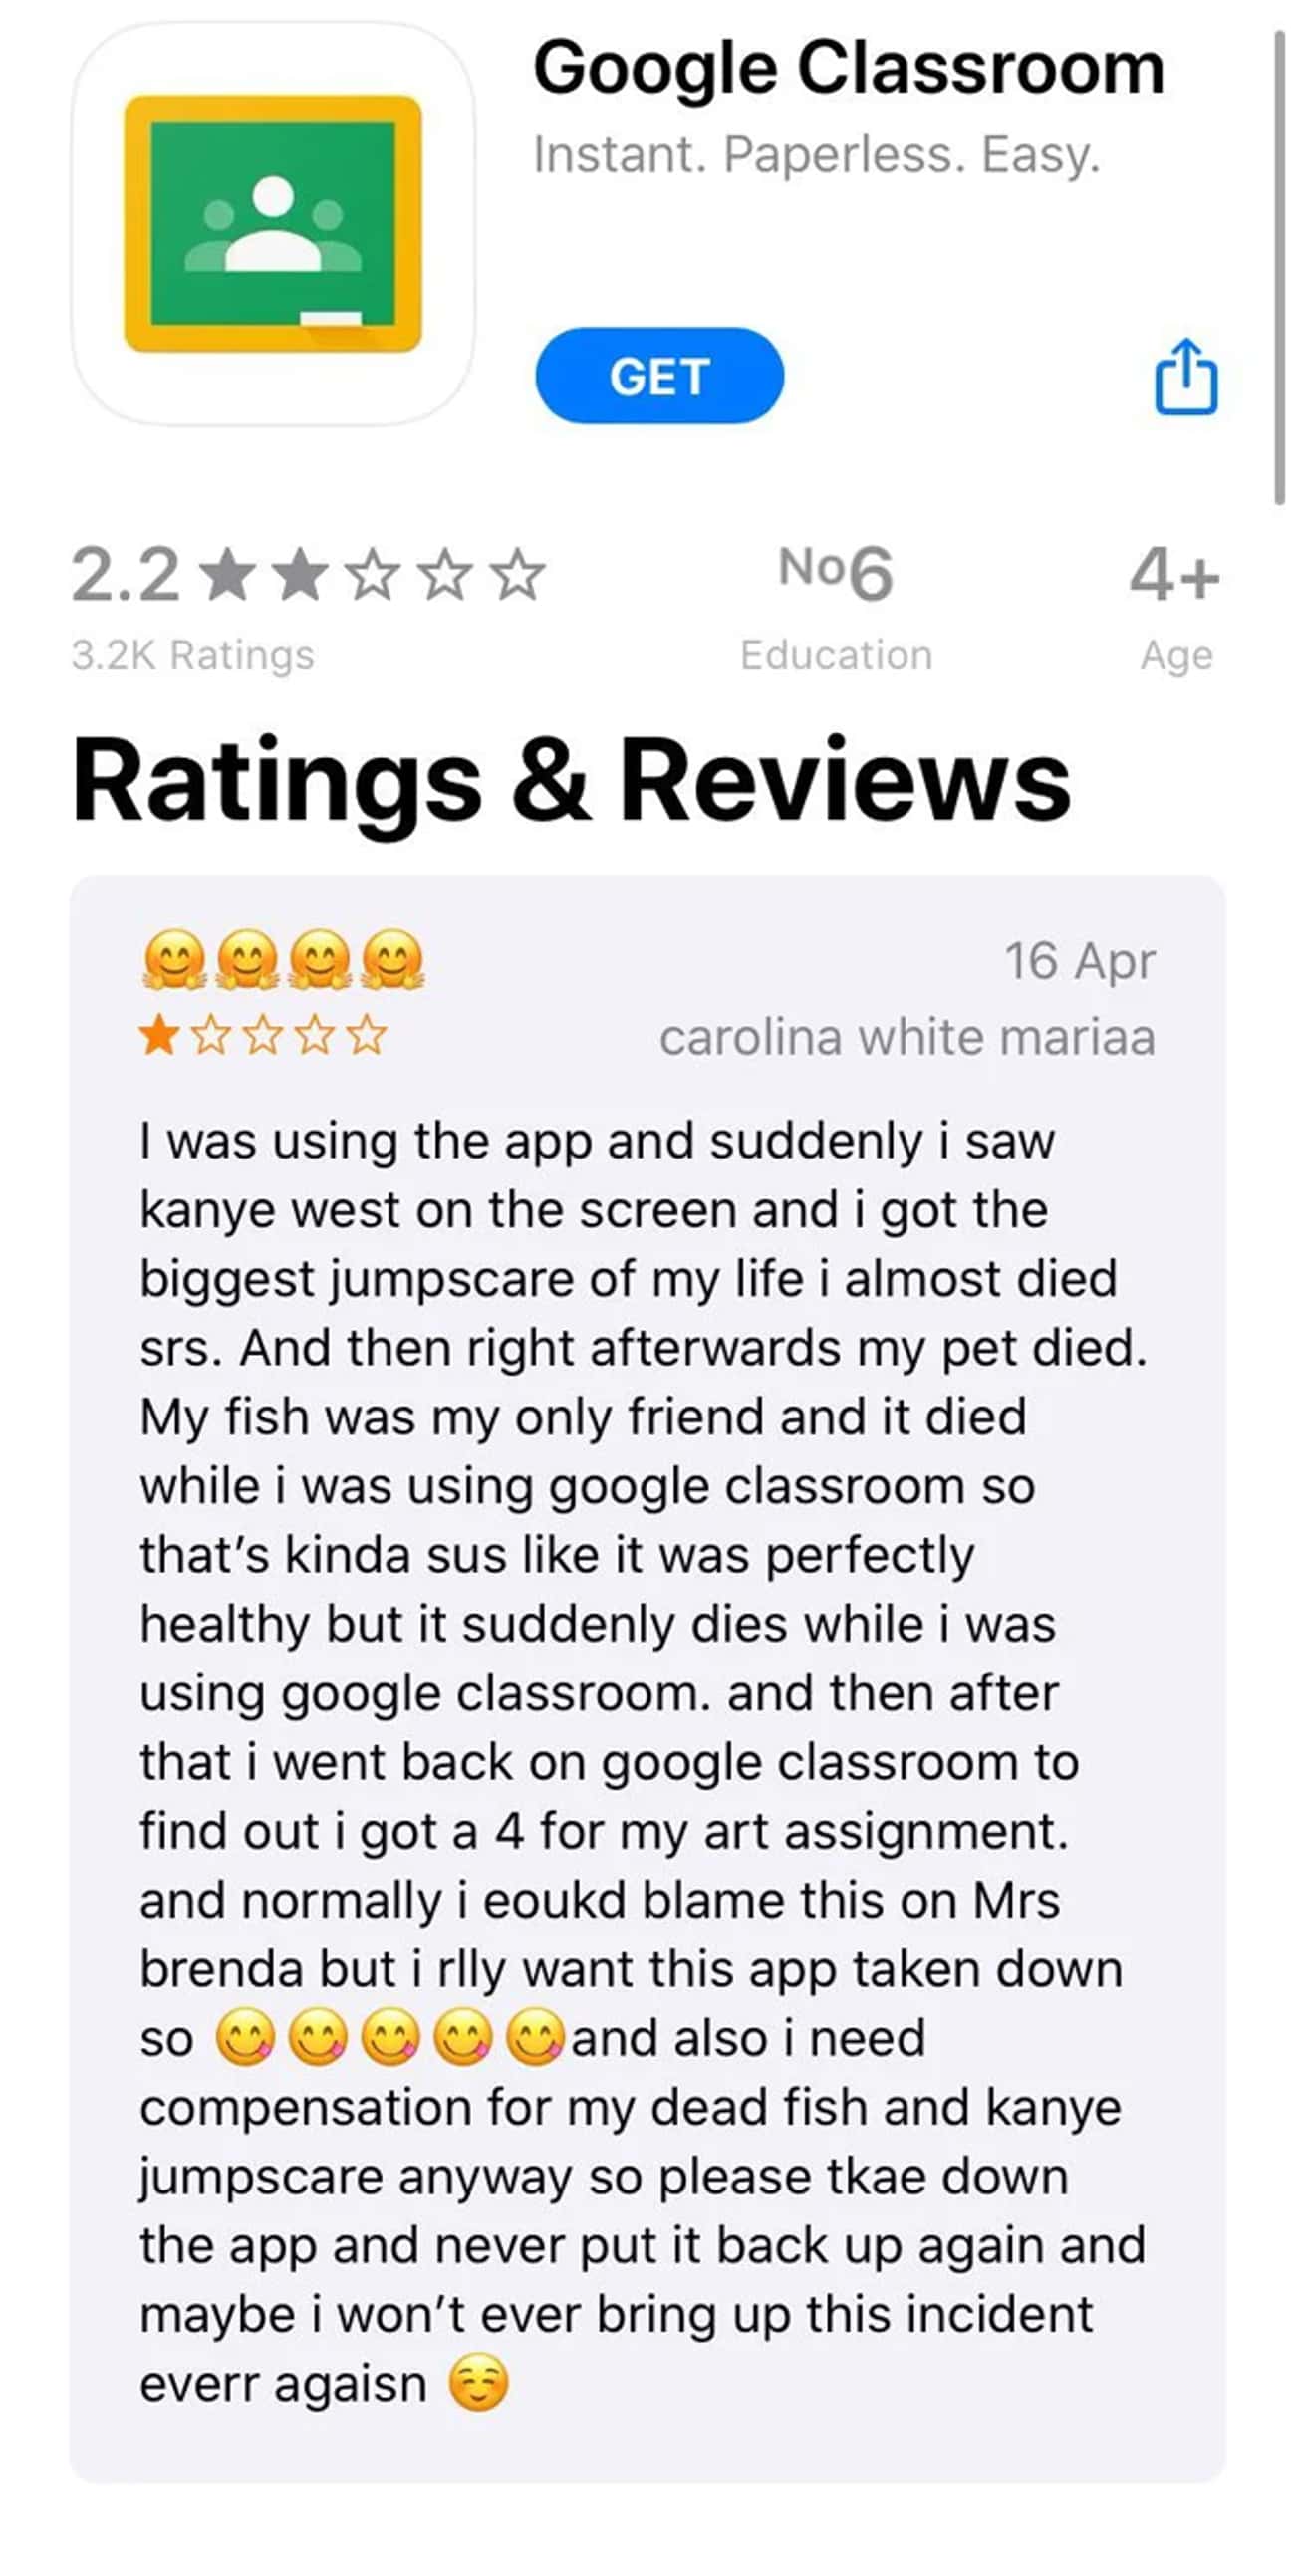 hilarious one-star reviews